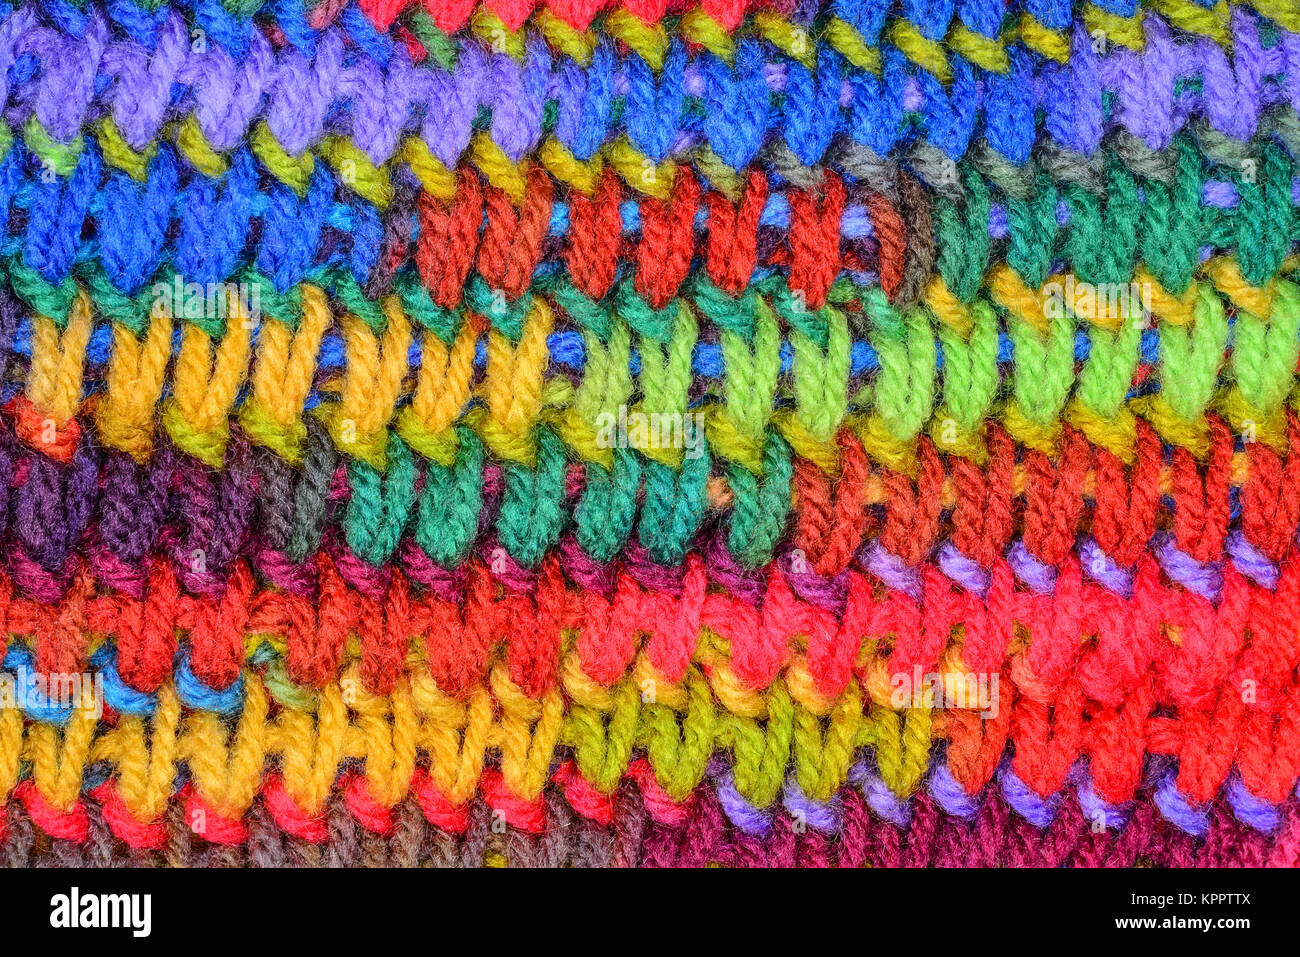 Muted colorful or colourful knitting stitch background.knit Stock Photo